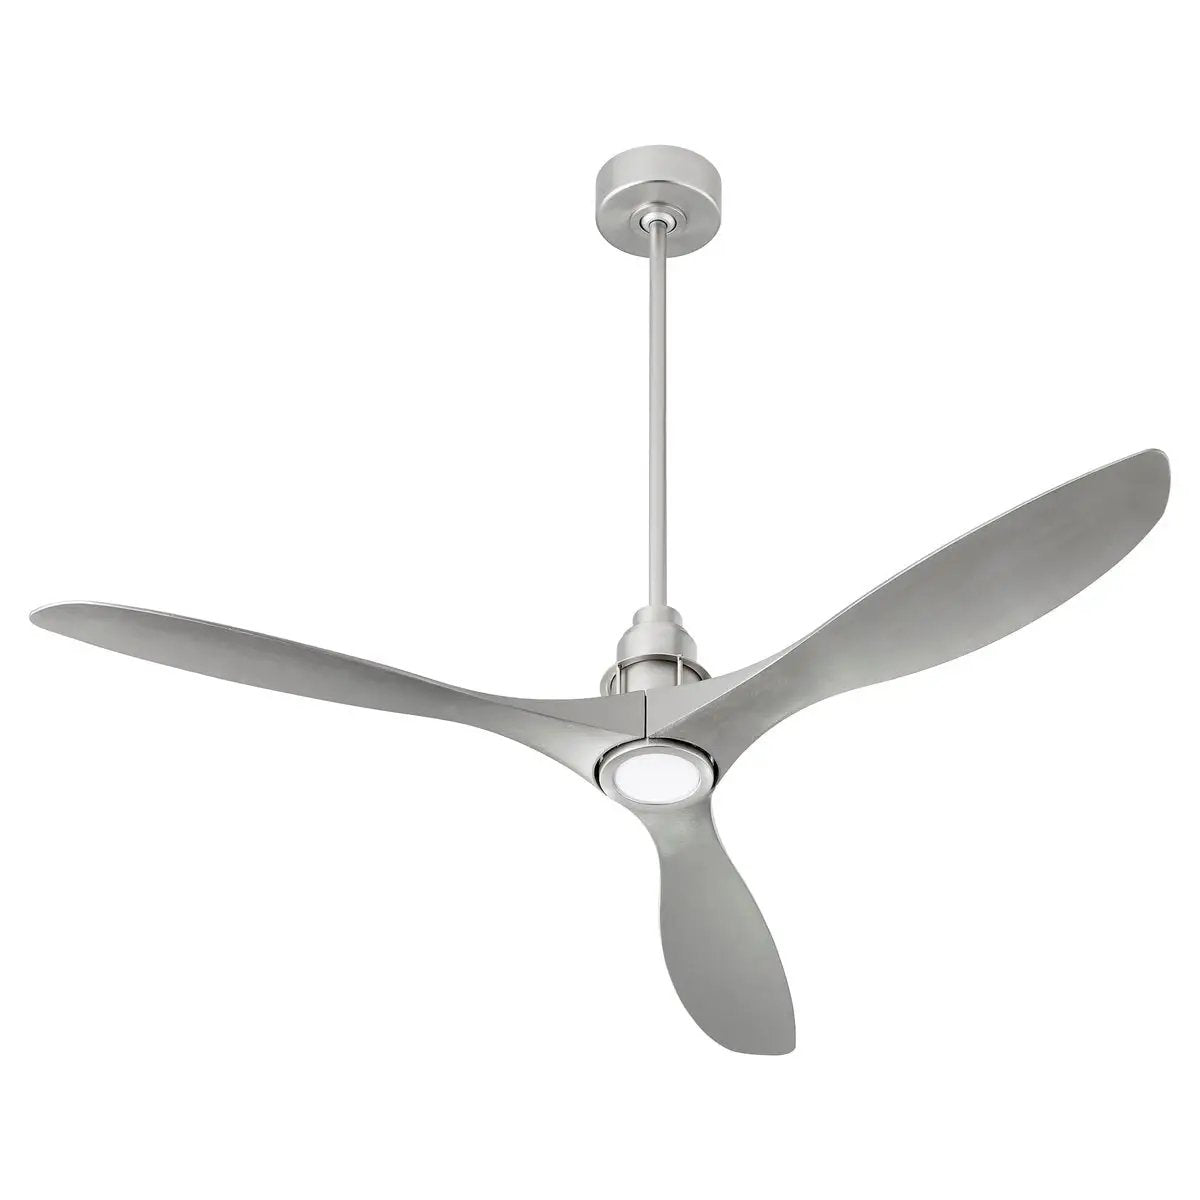 A modern ceiling fan with light, featuring a sleek design and powerful air circulation. Perfect for any interior space.